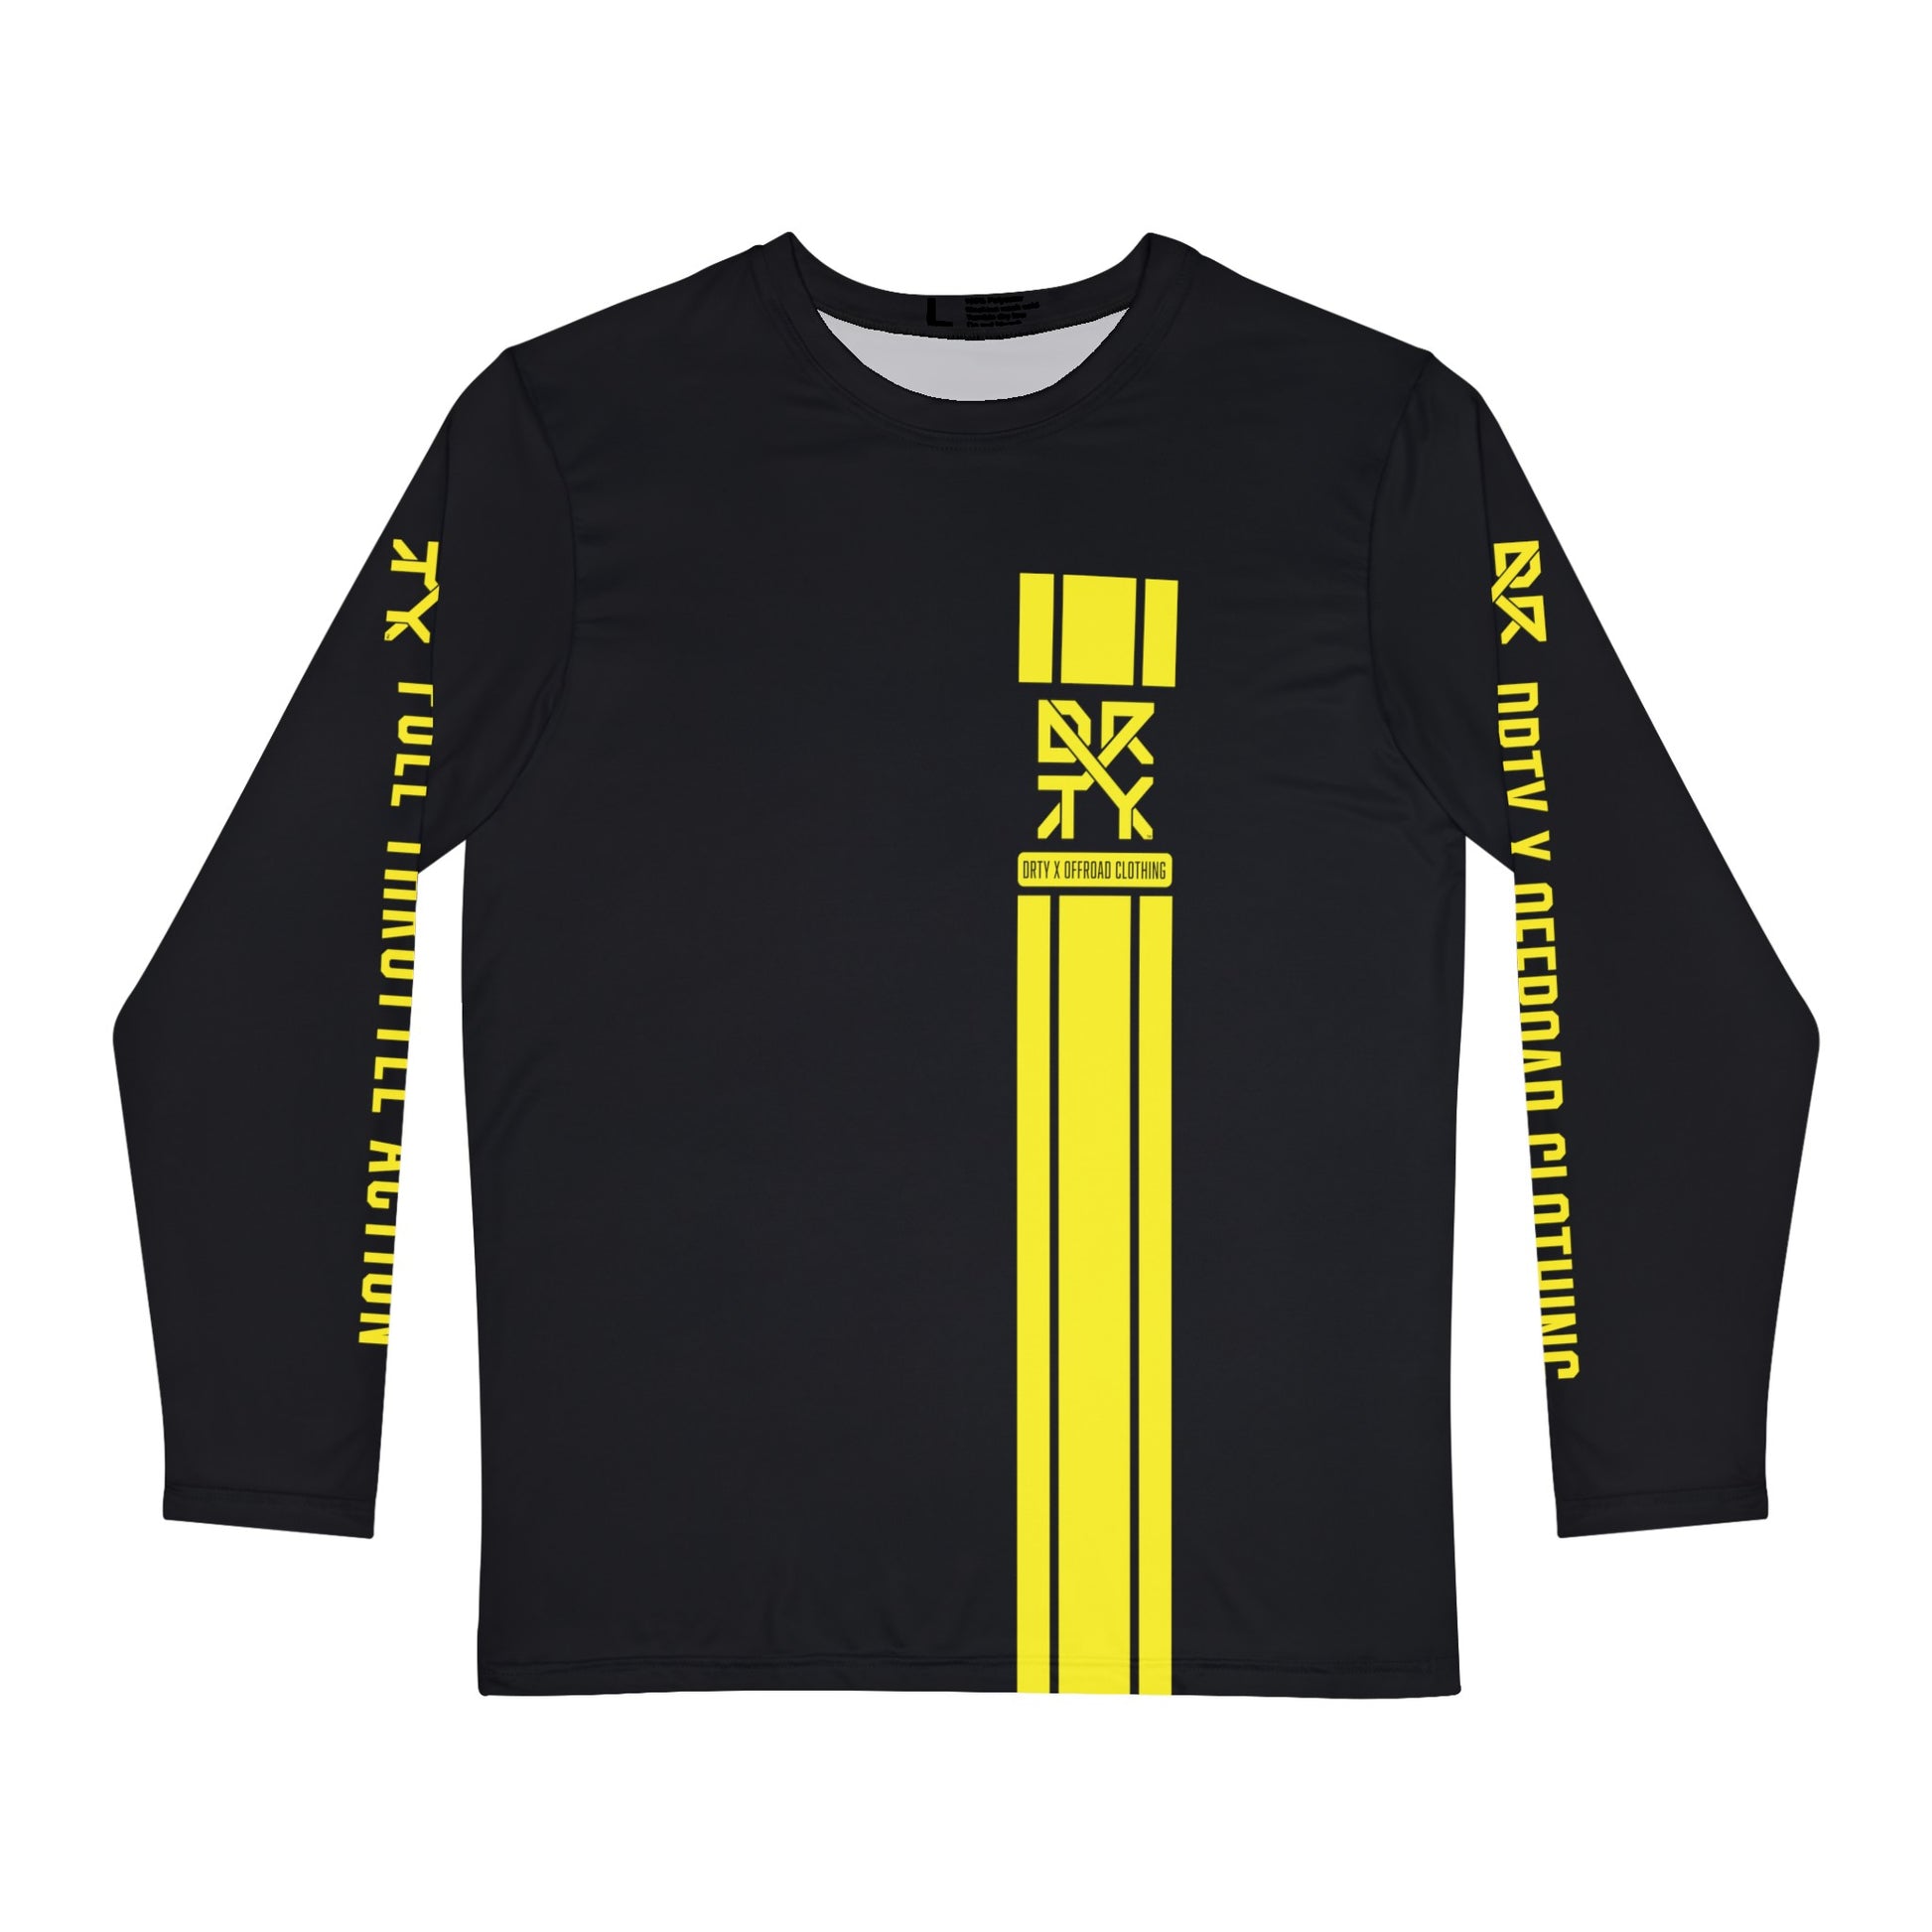 This image showcases the front view of a long sleeve shirt with a medium DRTY X Logo on the left side of the shirt with stripes.